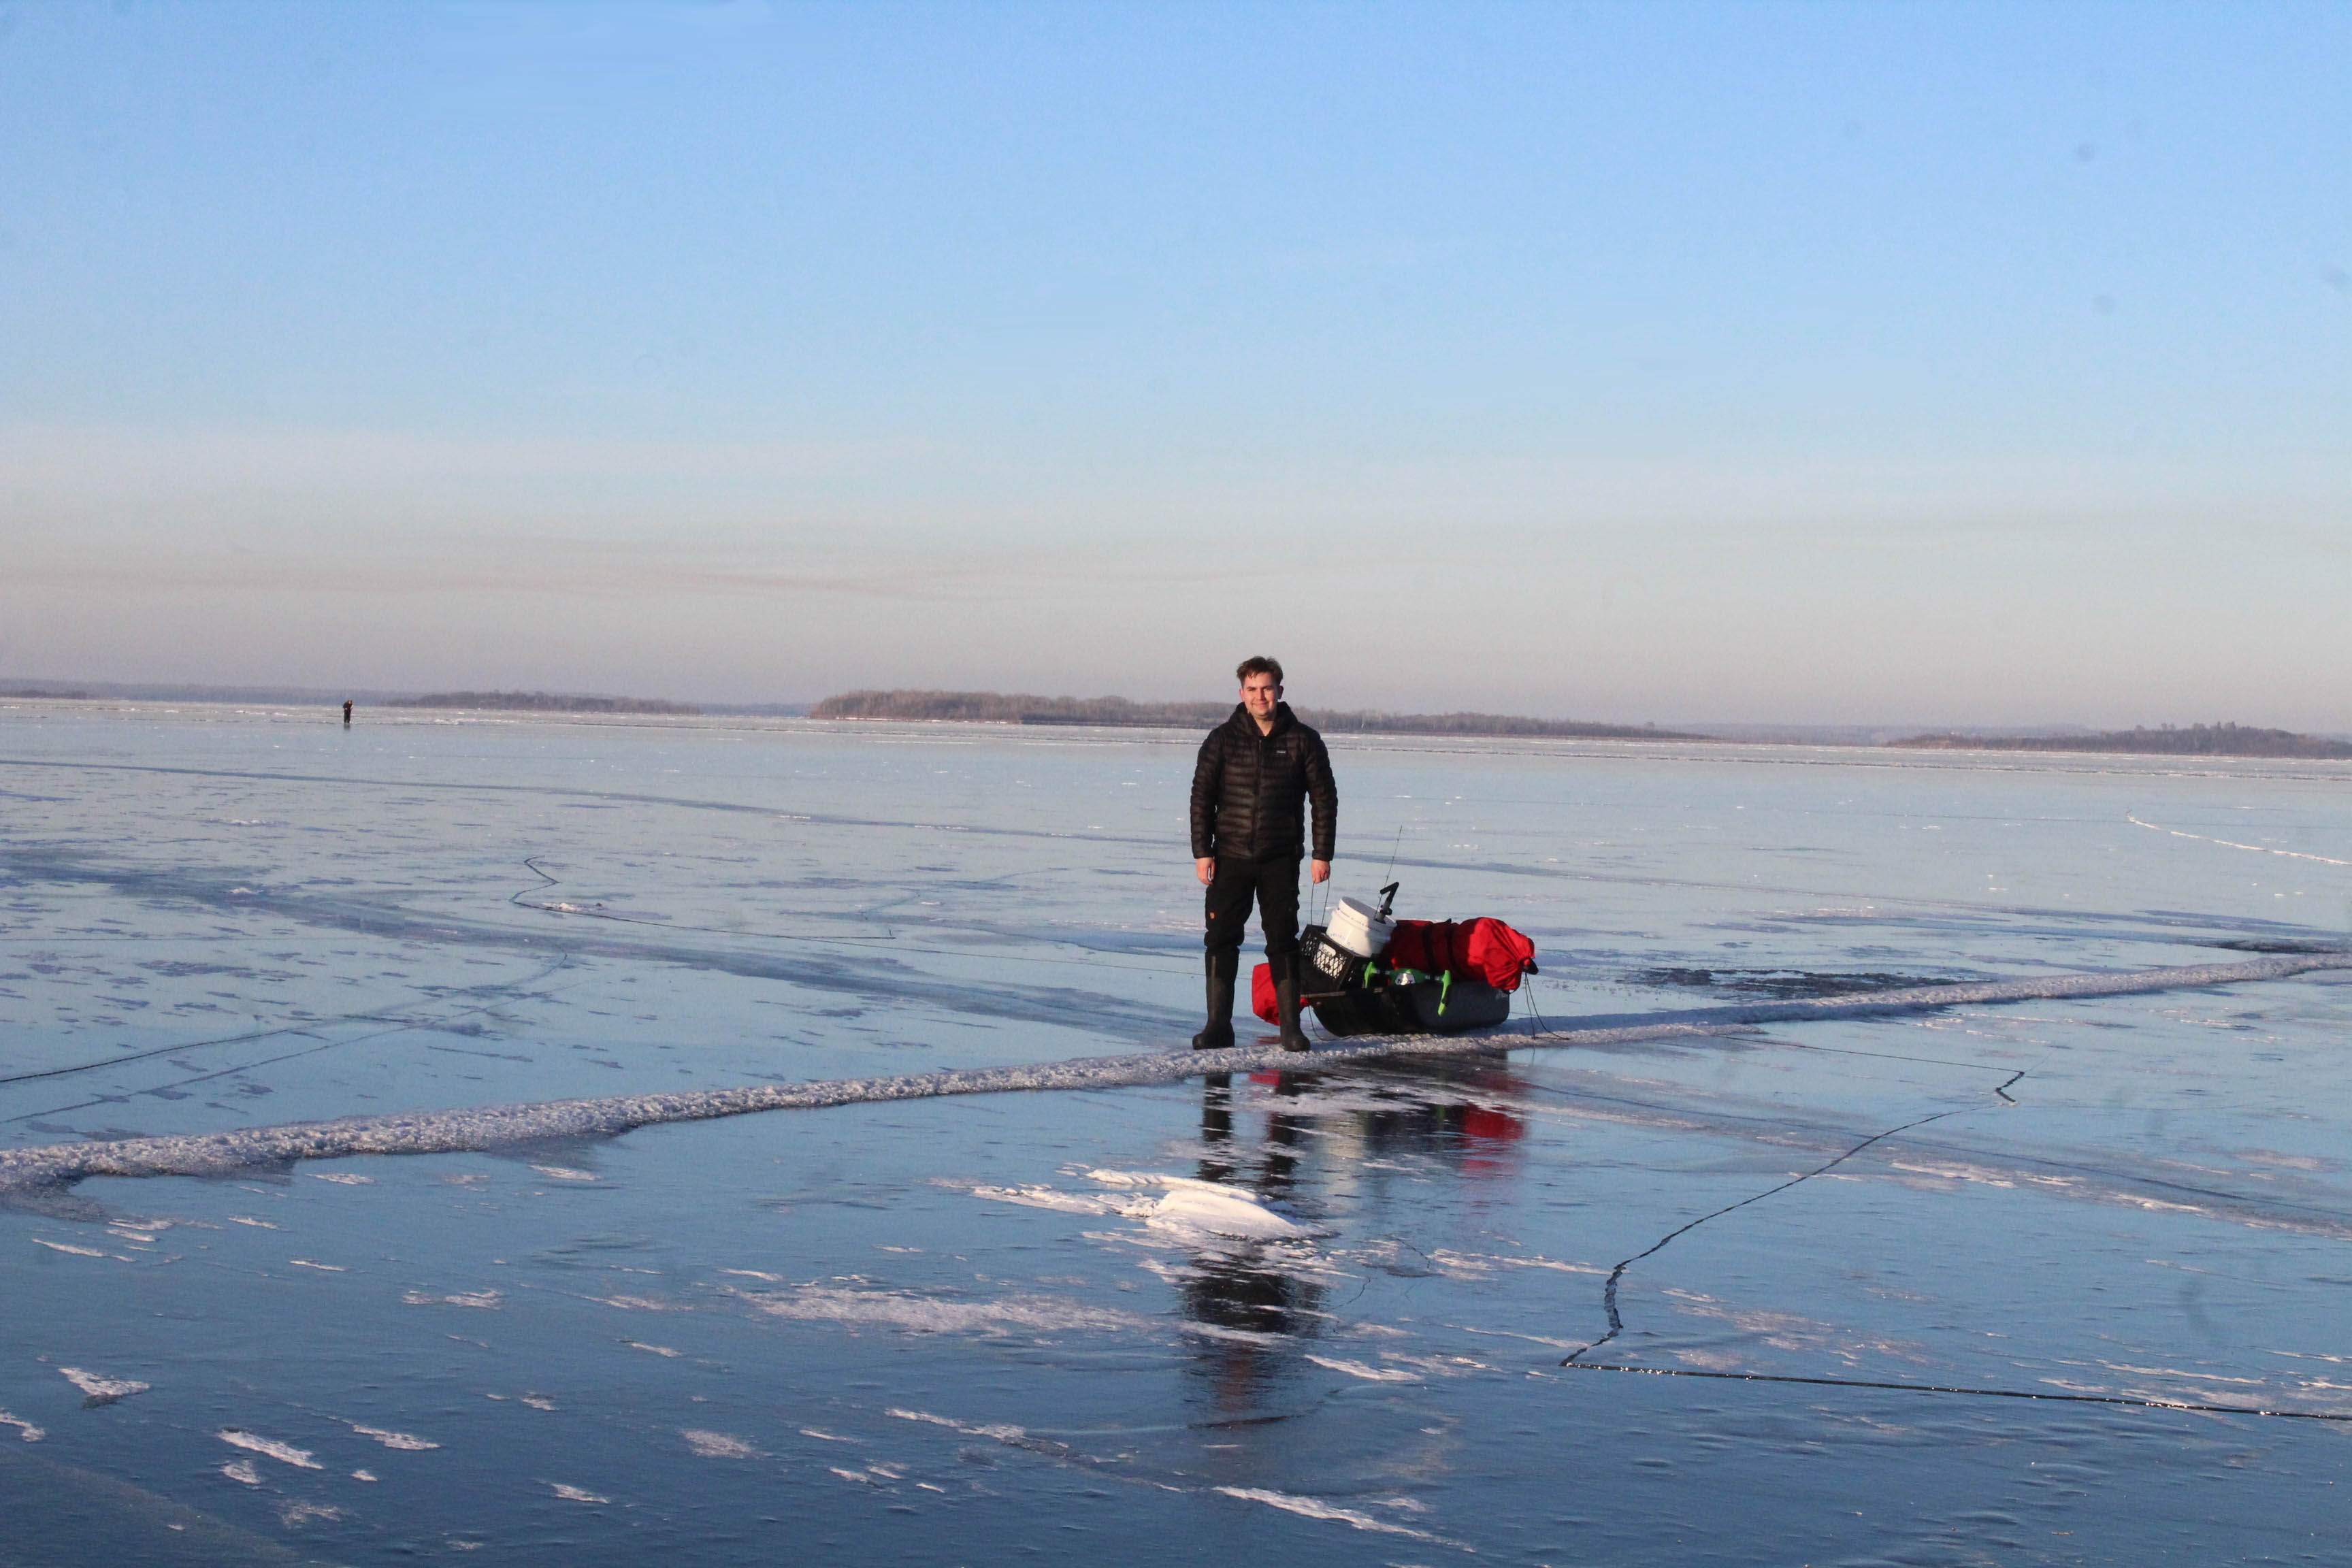 No-snow winter offers top-down look at ice-fishing for Lakeland anglers 